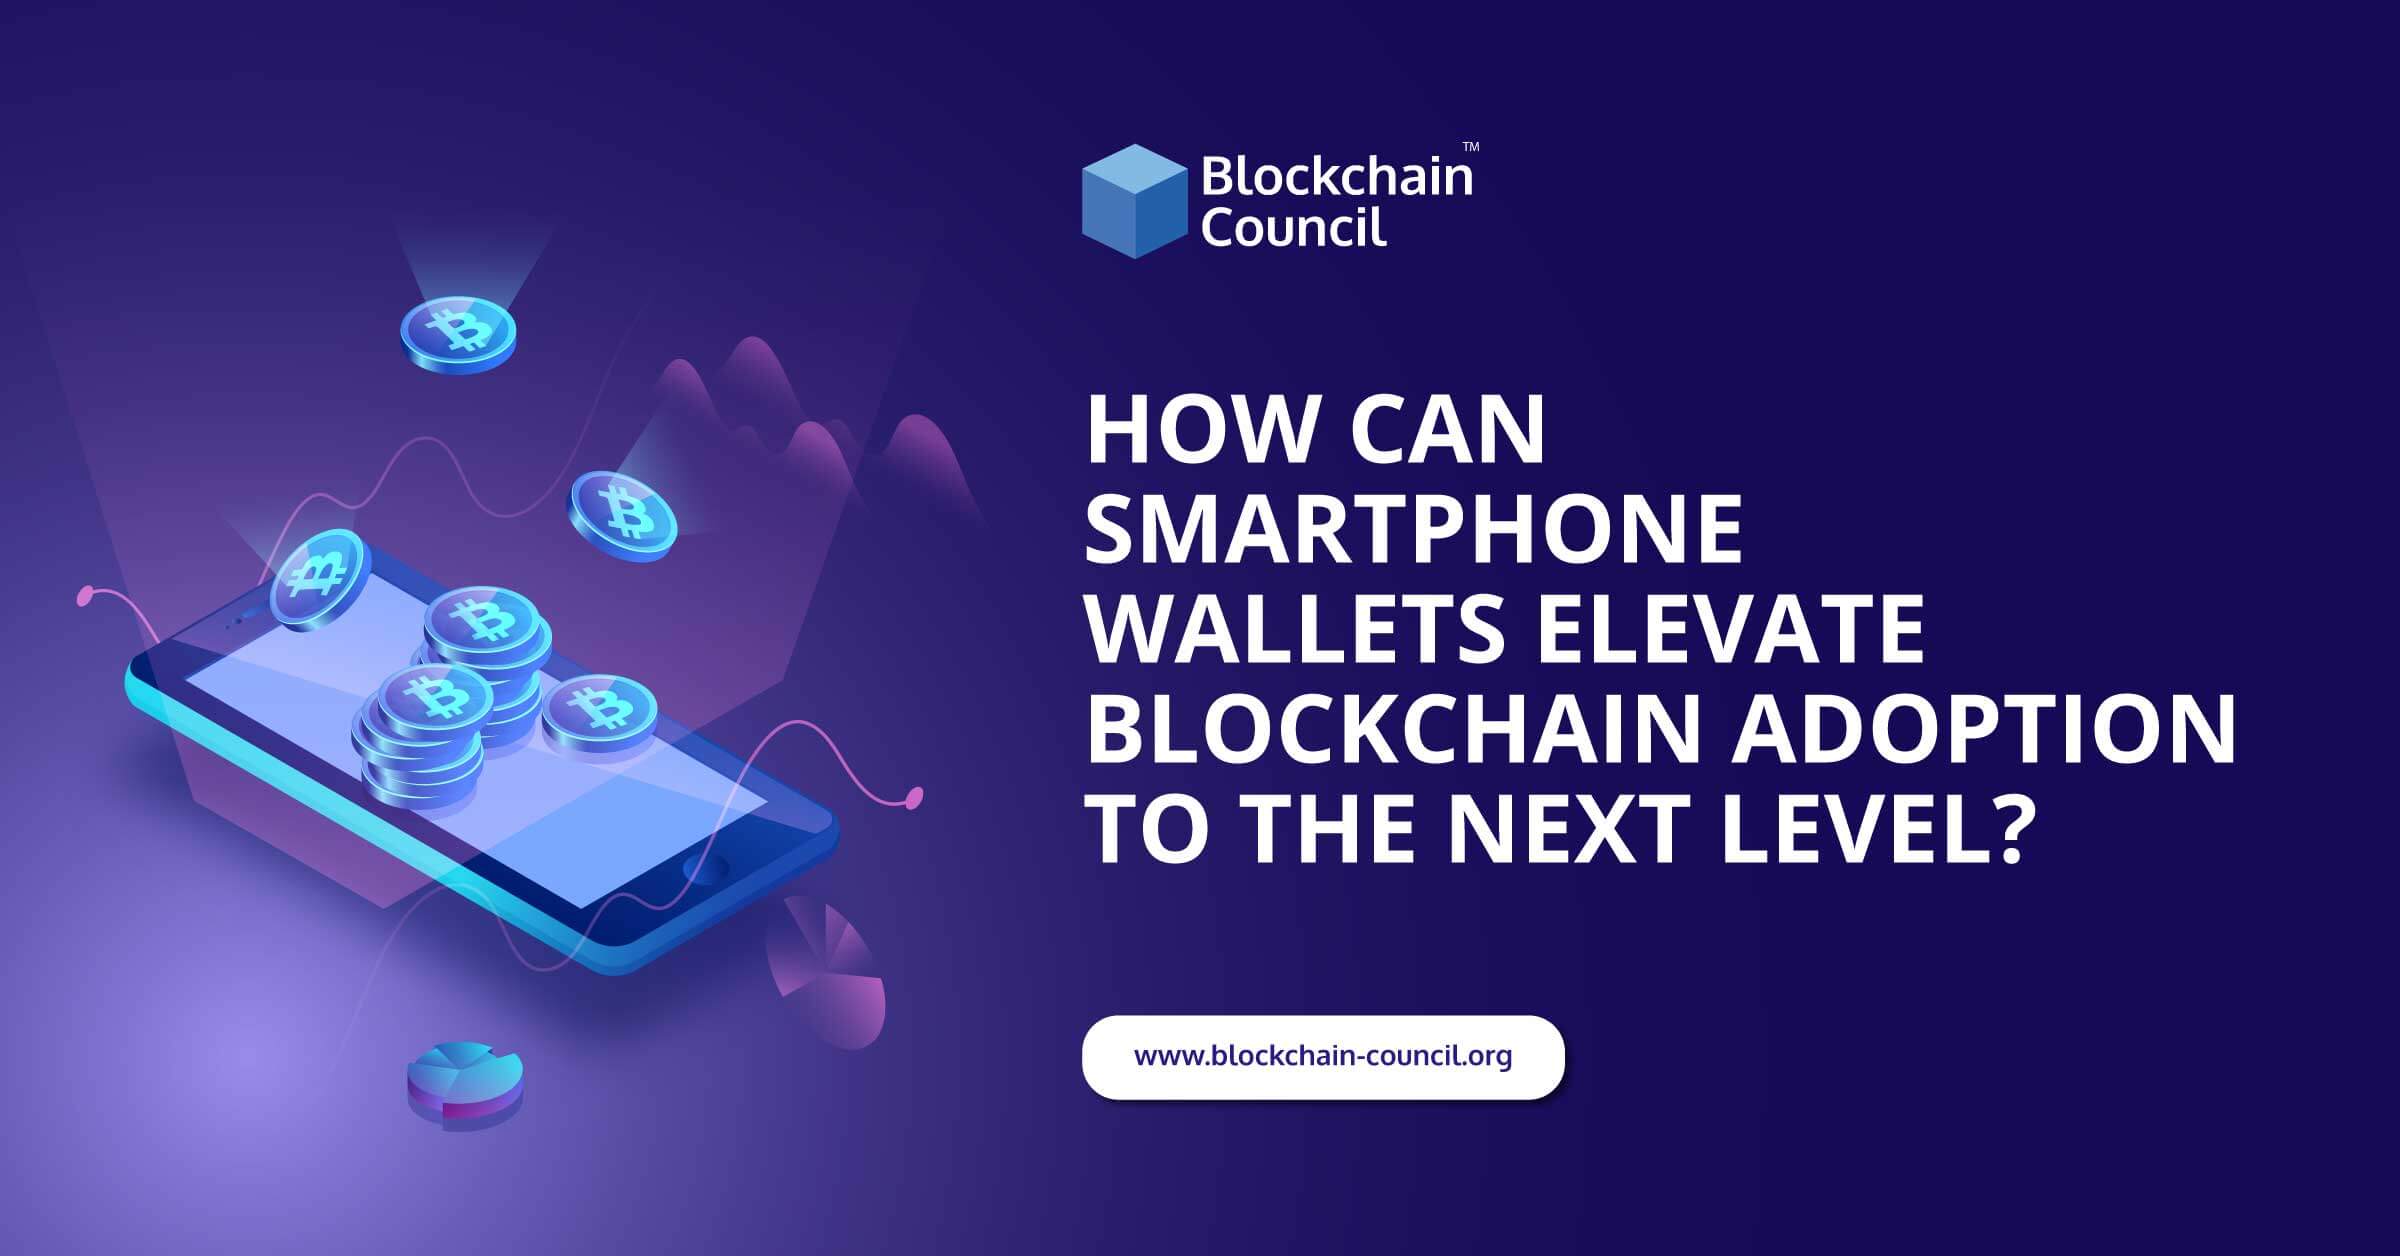 How Can Smartphone Wallets Elevate Blockchain Adoption to the Next Level?